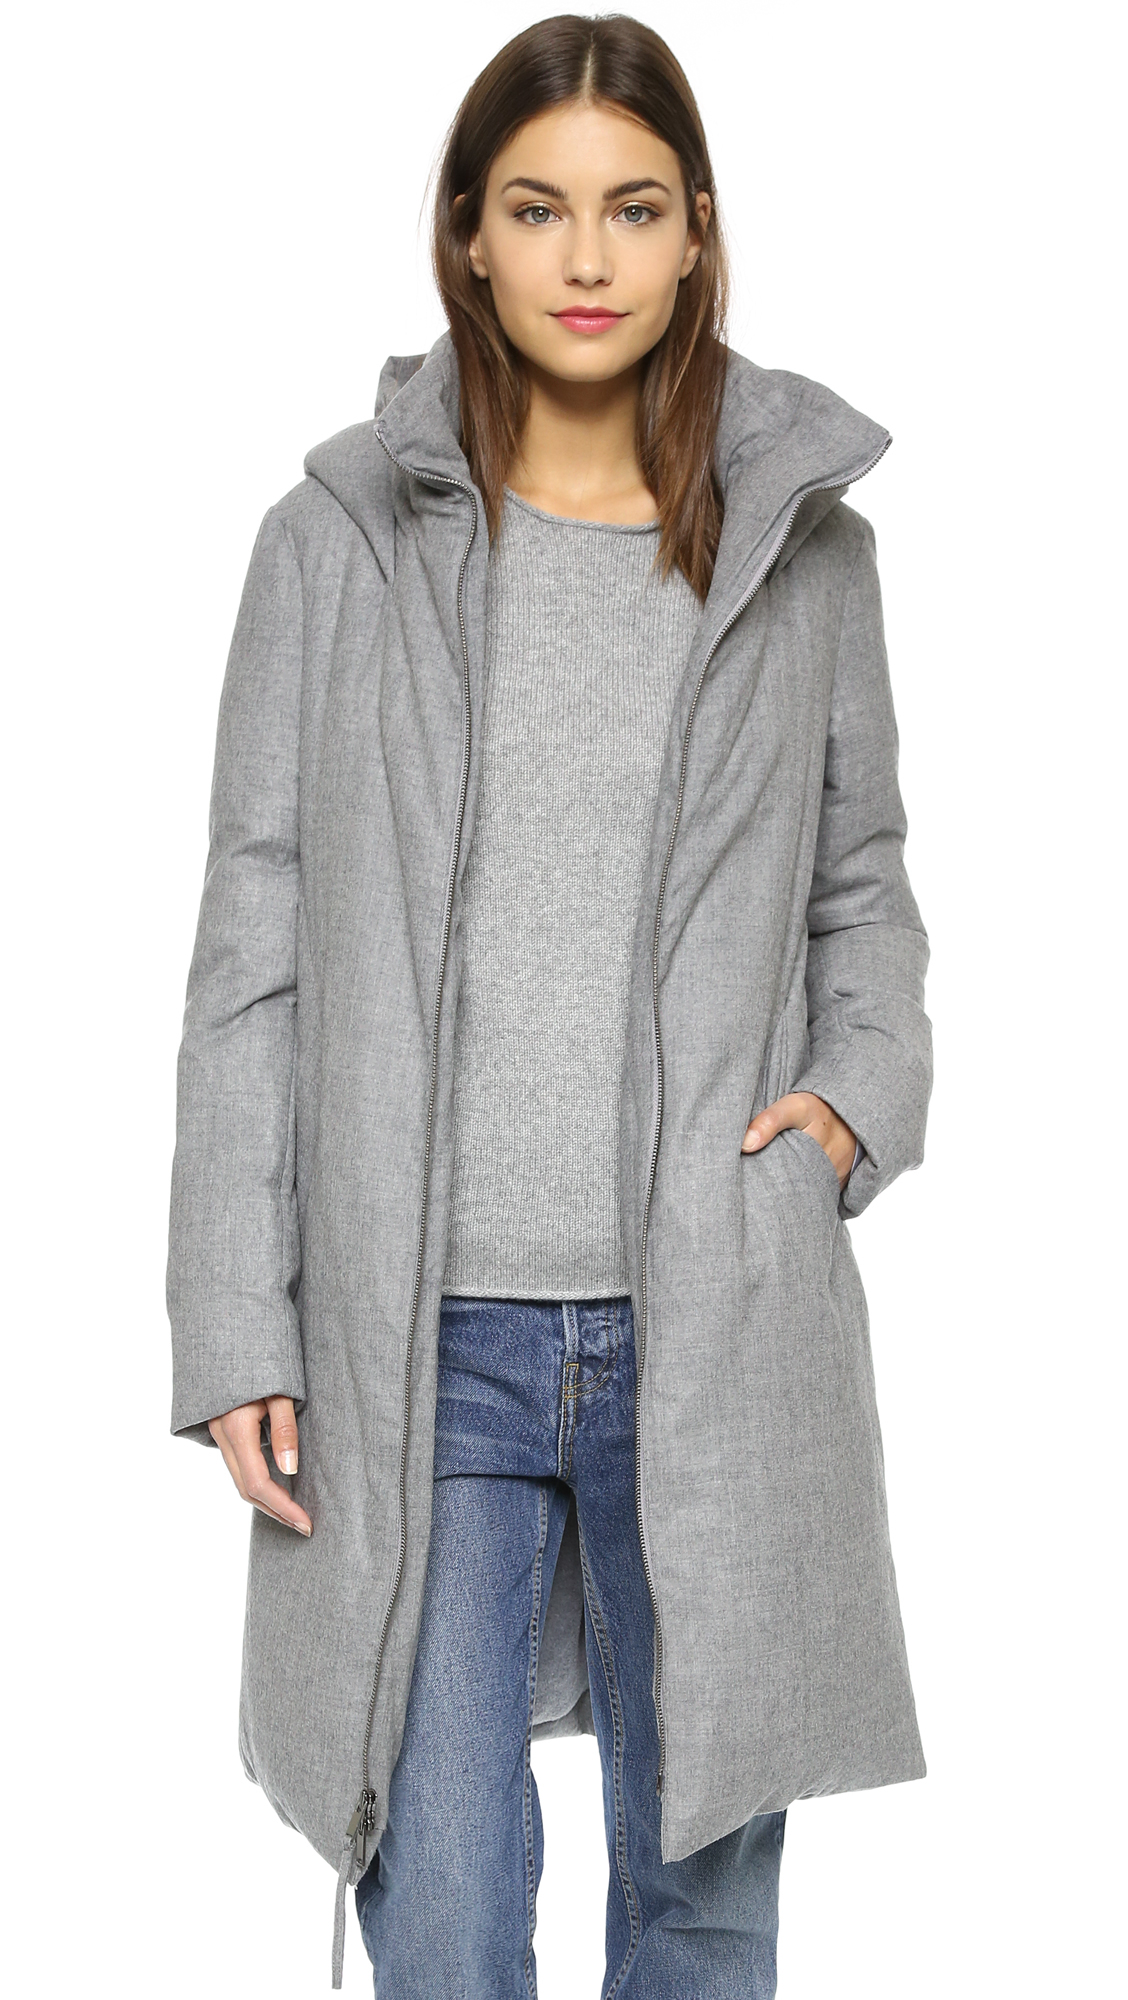 Dkny Pure Hooded Jacket - Heather Grey in Gray | Lyst